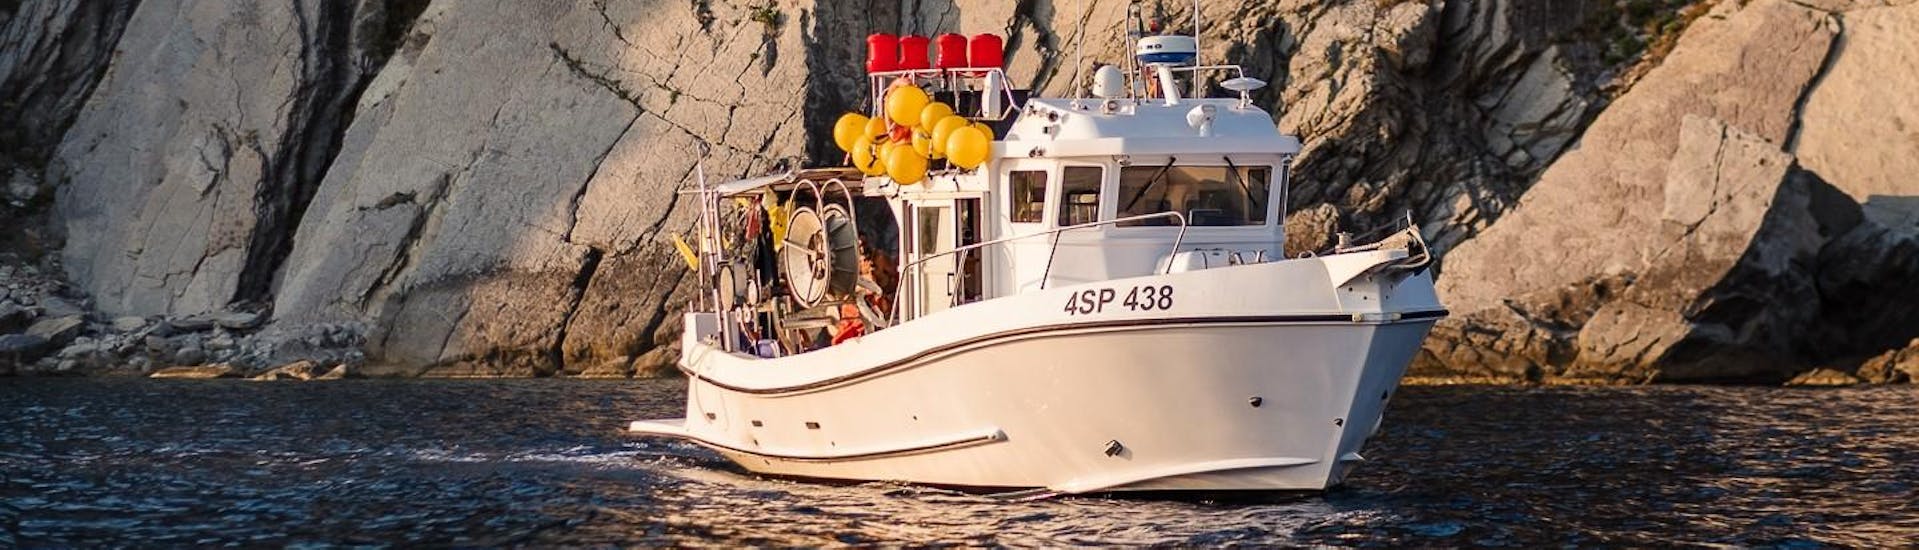 The motor fishing boat of Monterosso Pescaturismo during the Boat Trip from Monterosso with Fishing Experience.